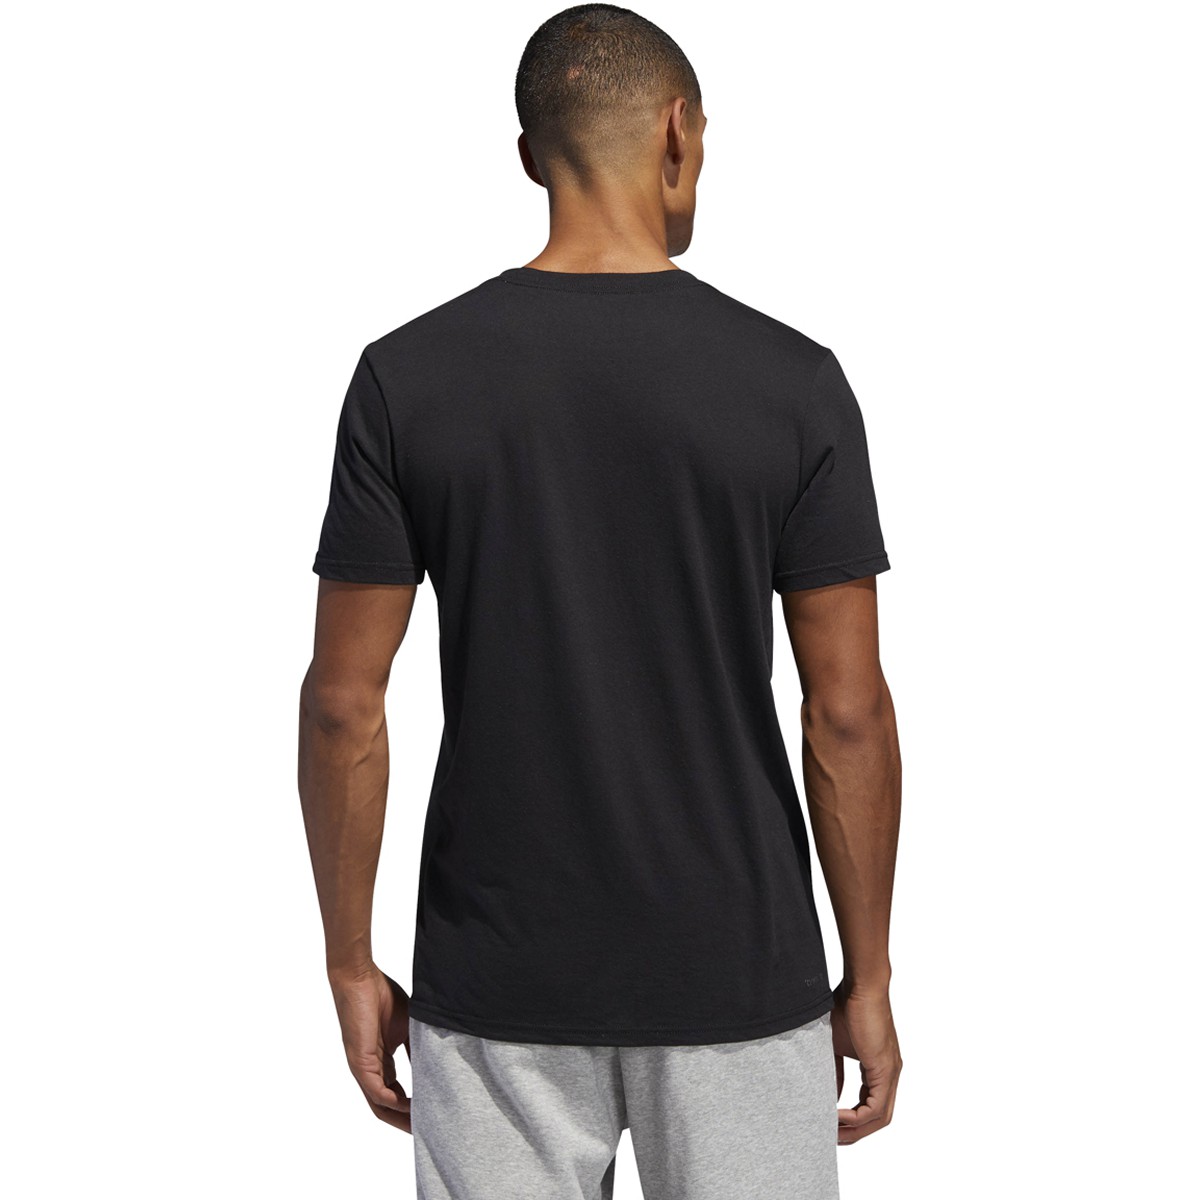 15 Minute Adidas workout tee with Comfort Workout Clothes